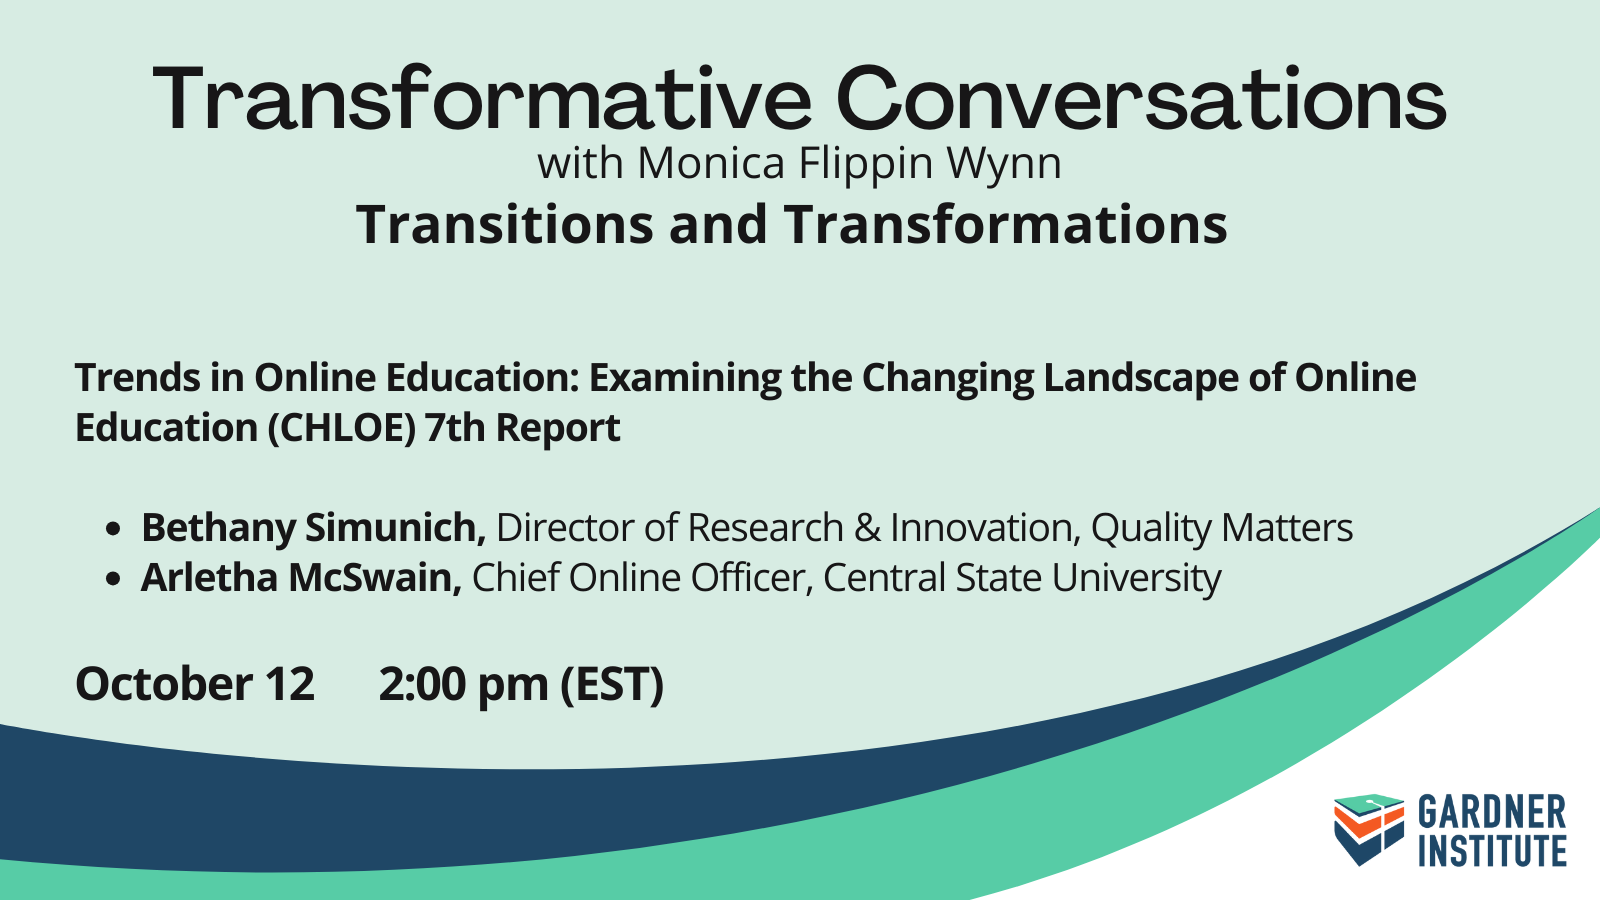 Transformative Conversations Trends in Online Education: Examining the Changing Landscape of Online Education (CHLOE) 7th Report Bethany Simunich, Director of Research & Innovation, Quality Matters Arletha McSwain, Chief Online Officer, Central State University October 12, 2:00 pm (EST)